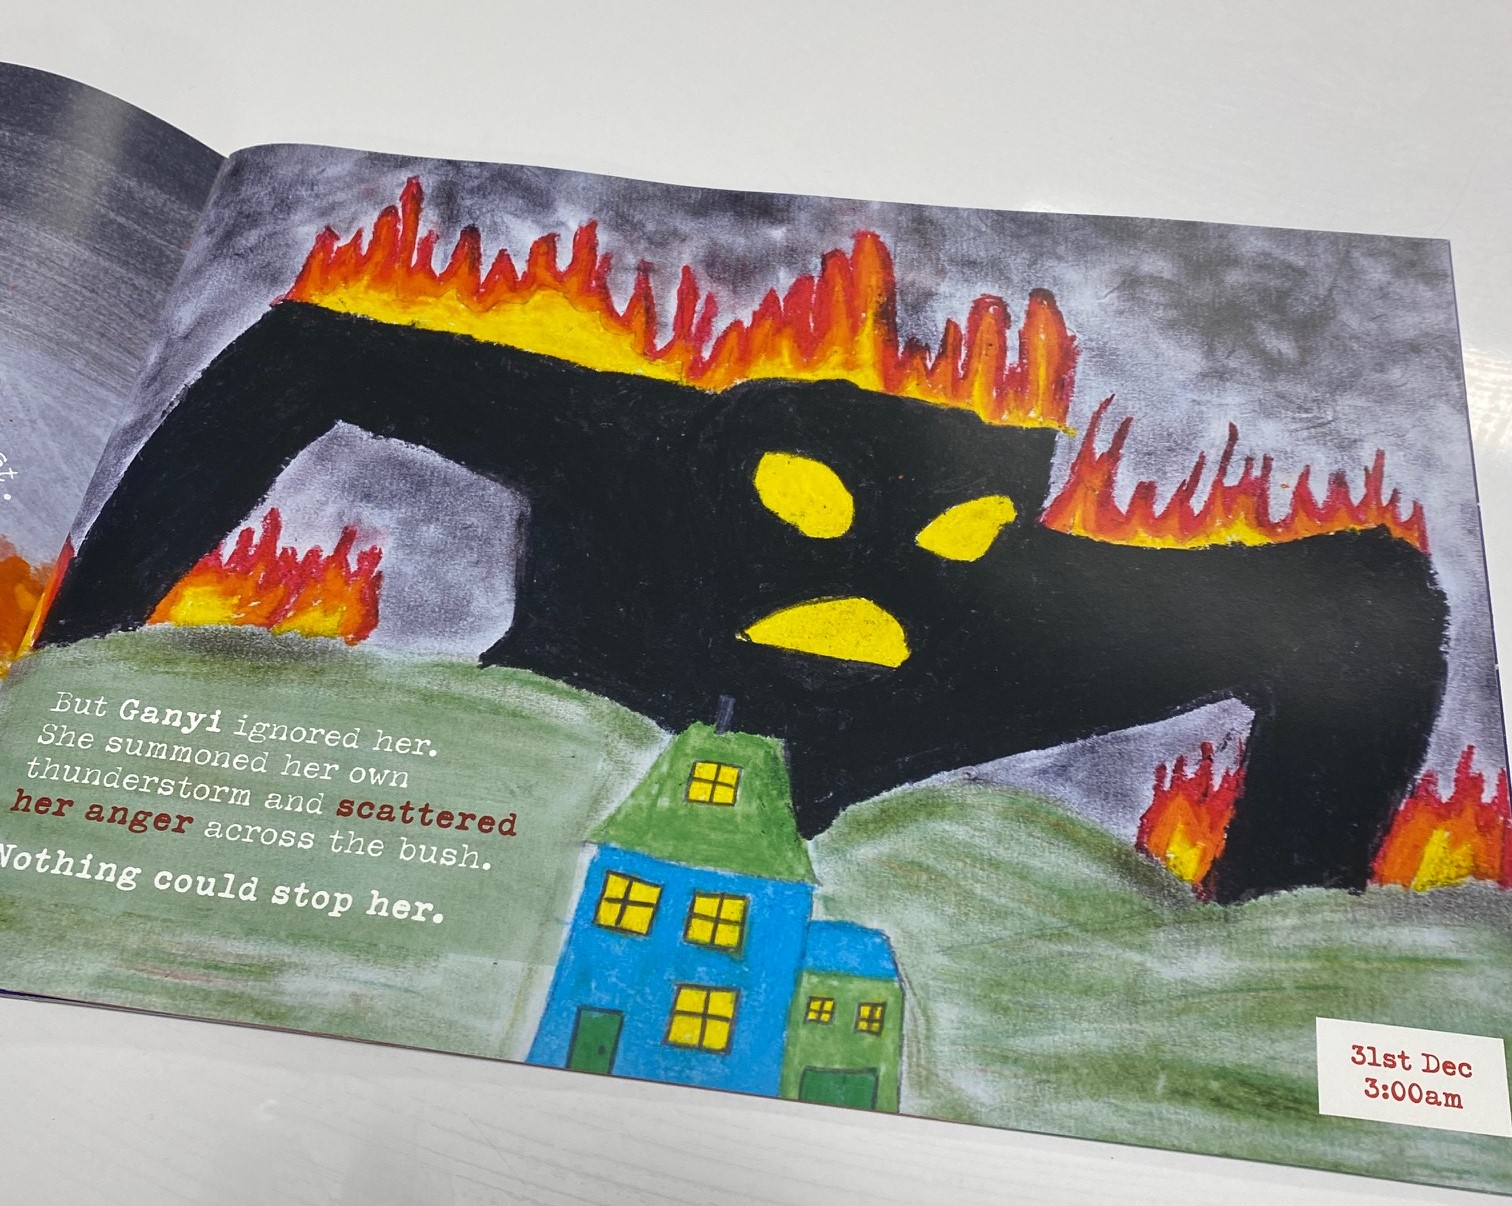 A picture showing a fire from the Birdie Tree book